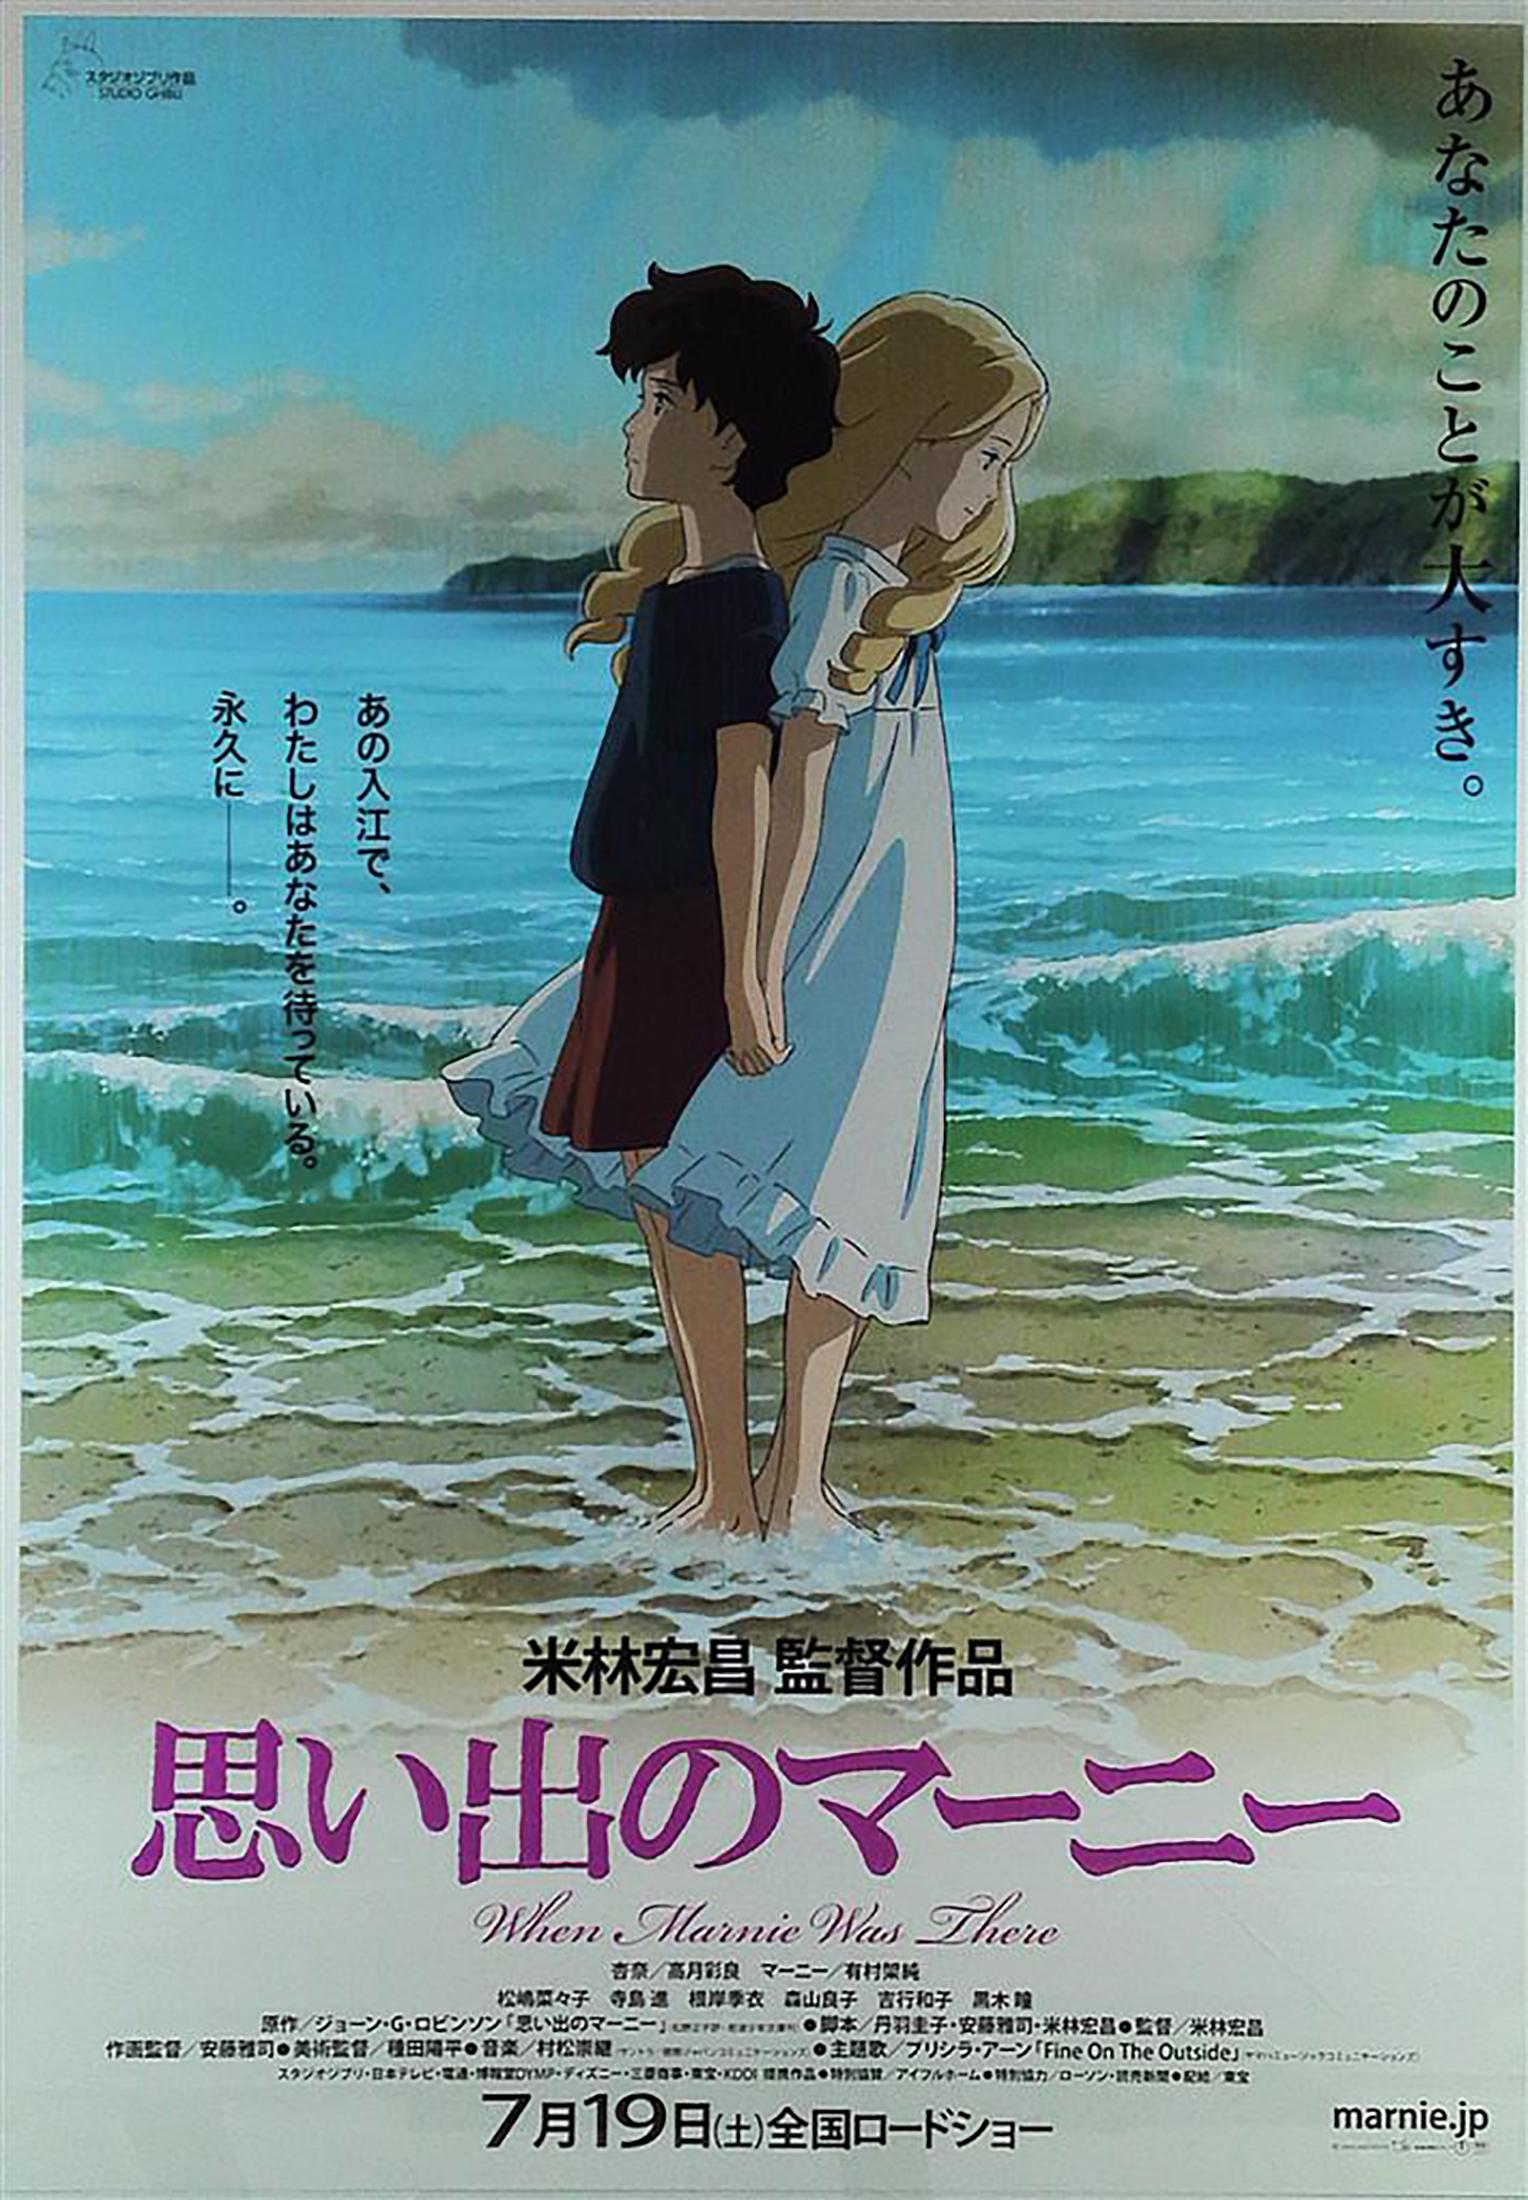 Unknown Print - When Marnie Was There Original Vintage Large Theatrical Poster, Studio Ghibli